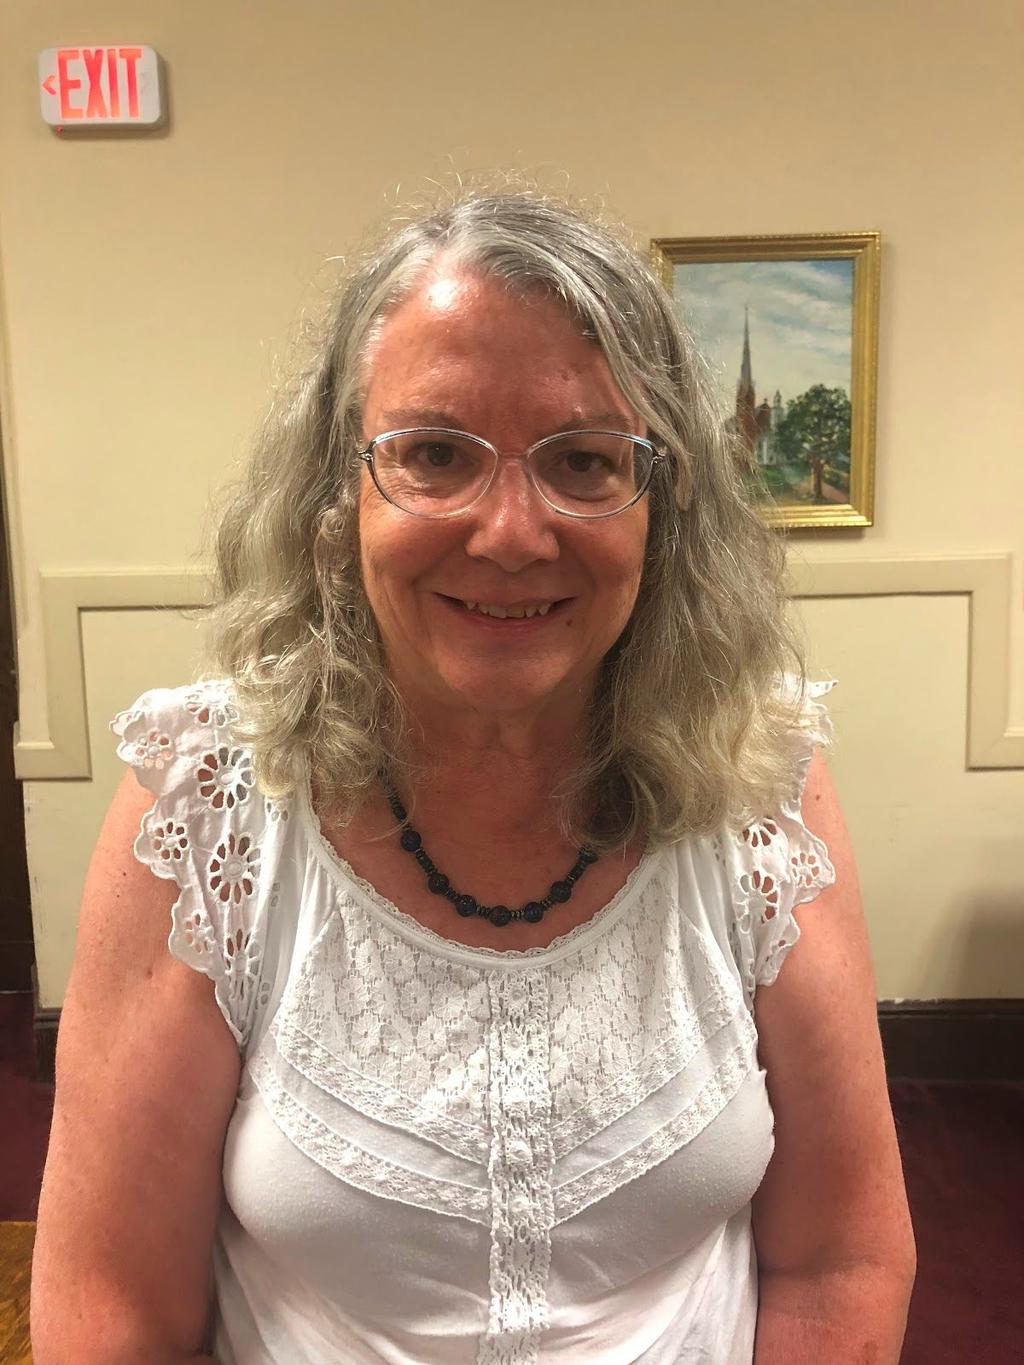 SPECIAL ANNOUNCEMENTS Meet your new Executive Committee Member-at-Large, Ann Marie! I moved to Middletown last August after selling my home of 31 years in Thornton, NH.